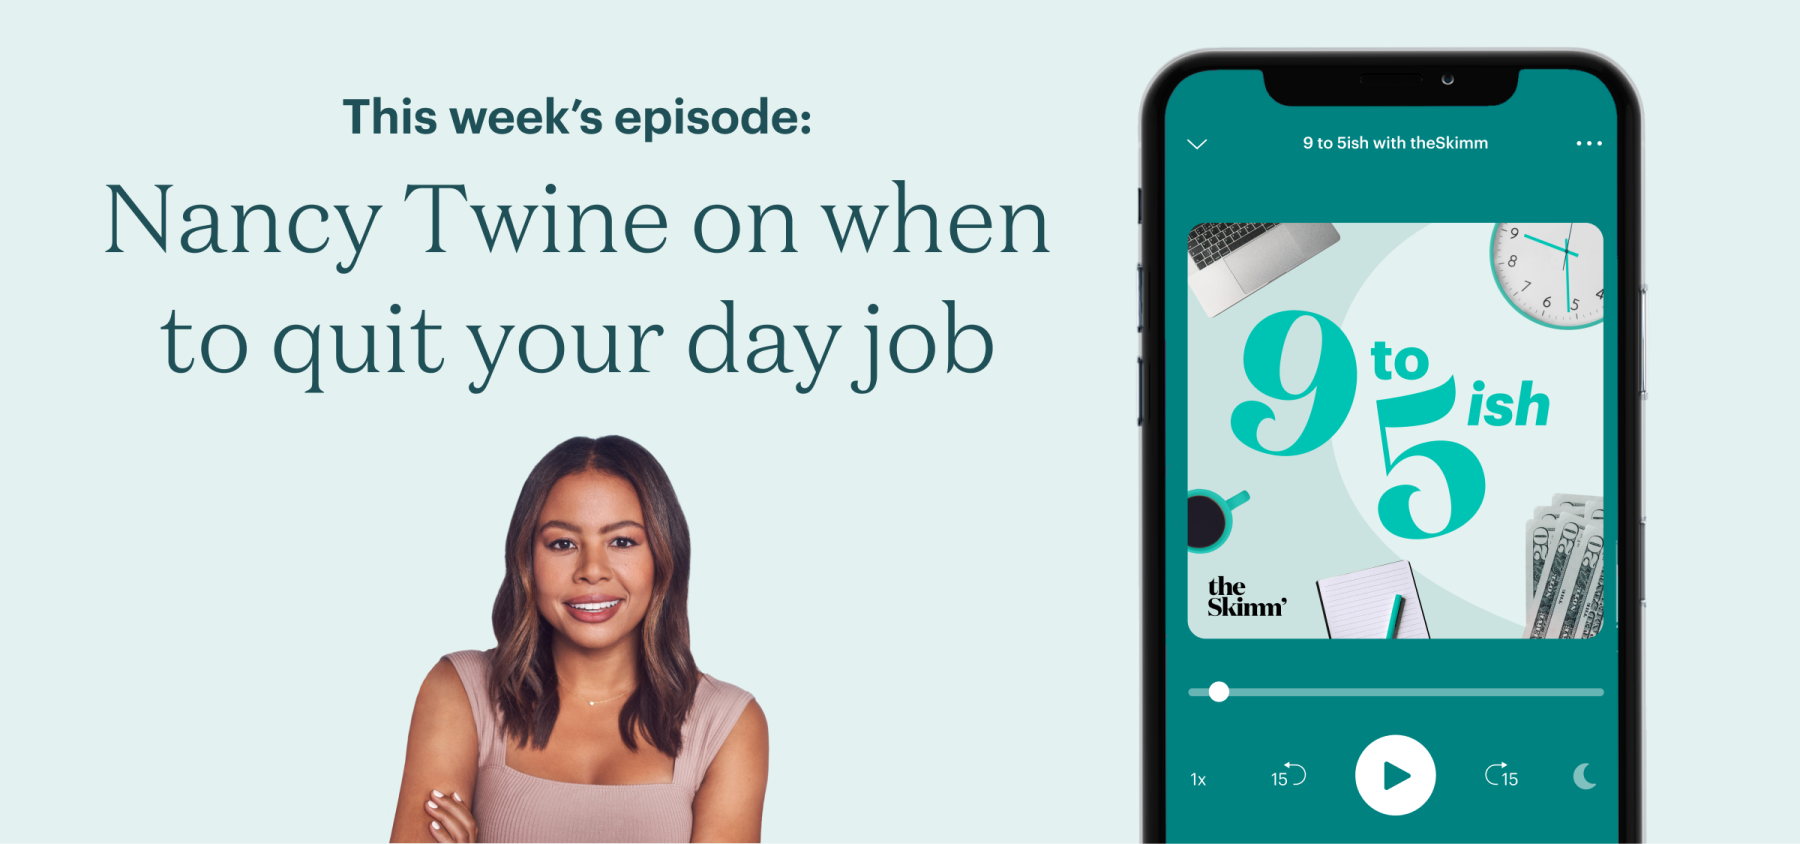 This week's episode: Nancy Twine on when to quit your day job